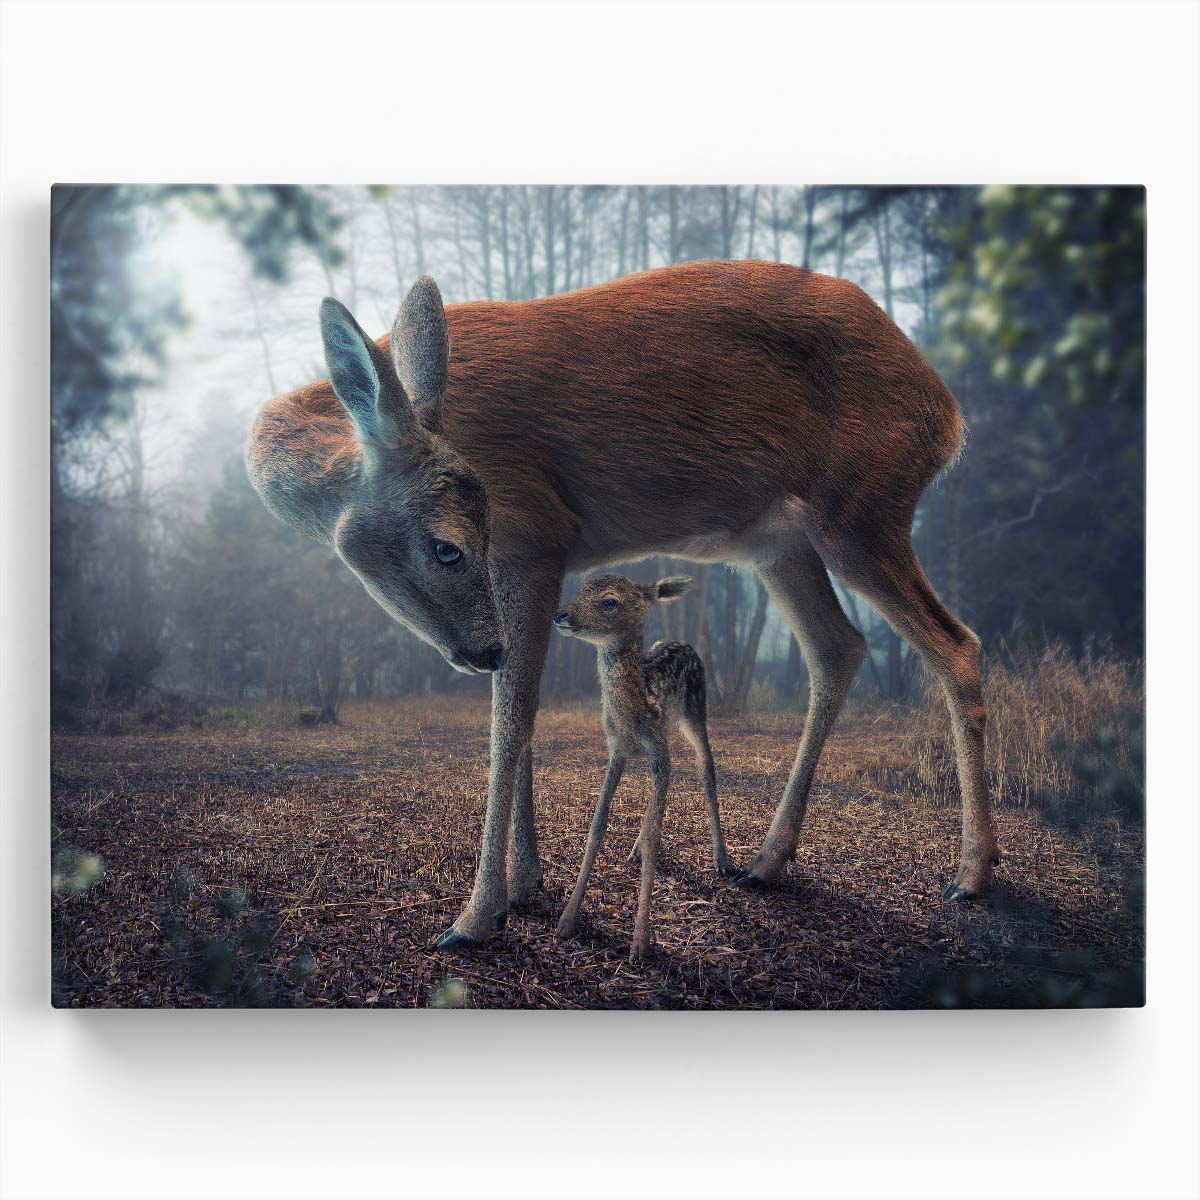 Surreal MotherBaby Deer Fantasy Forest Wall Art by Luxuriance Designs. Made in USA.